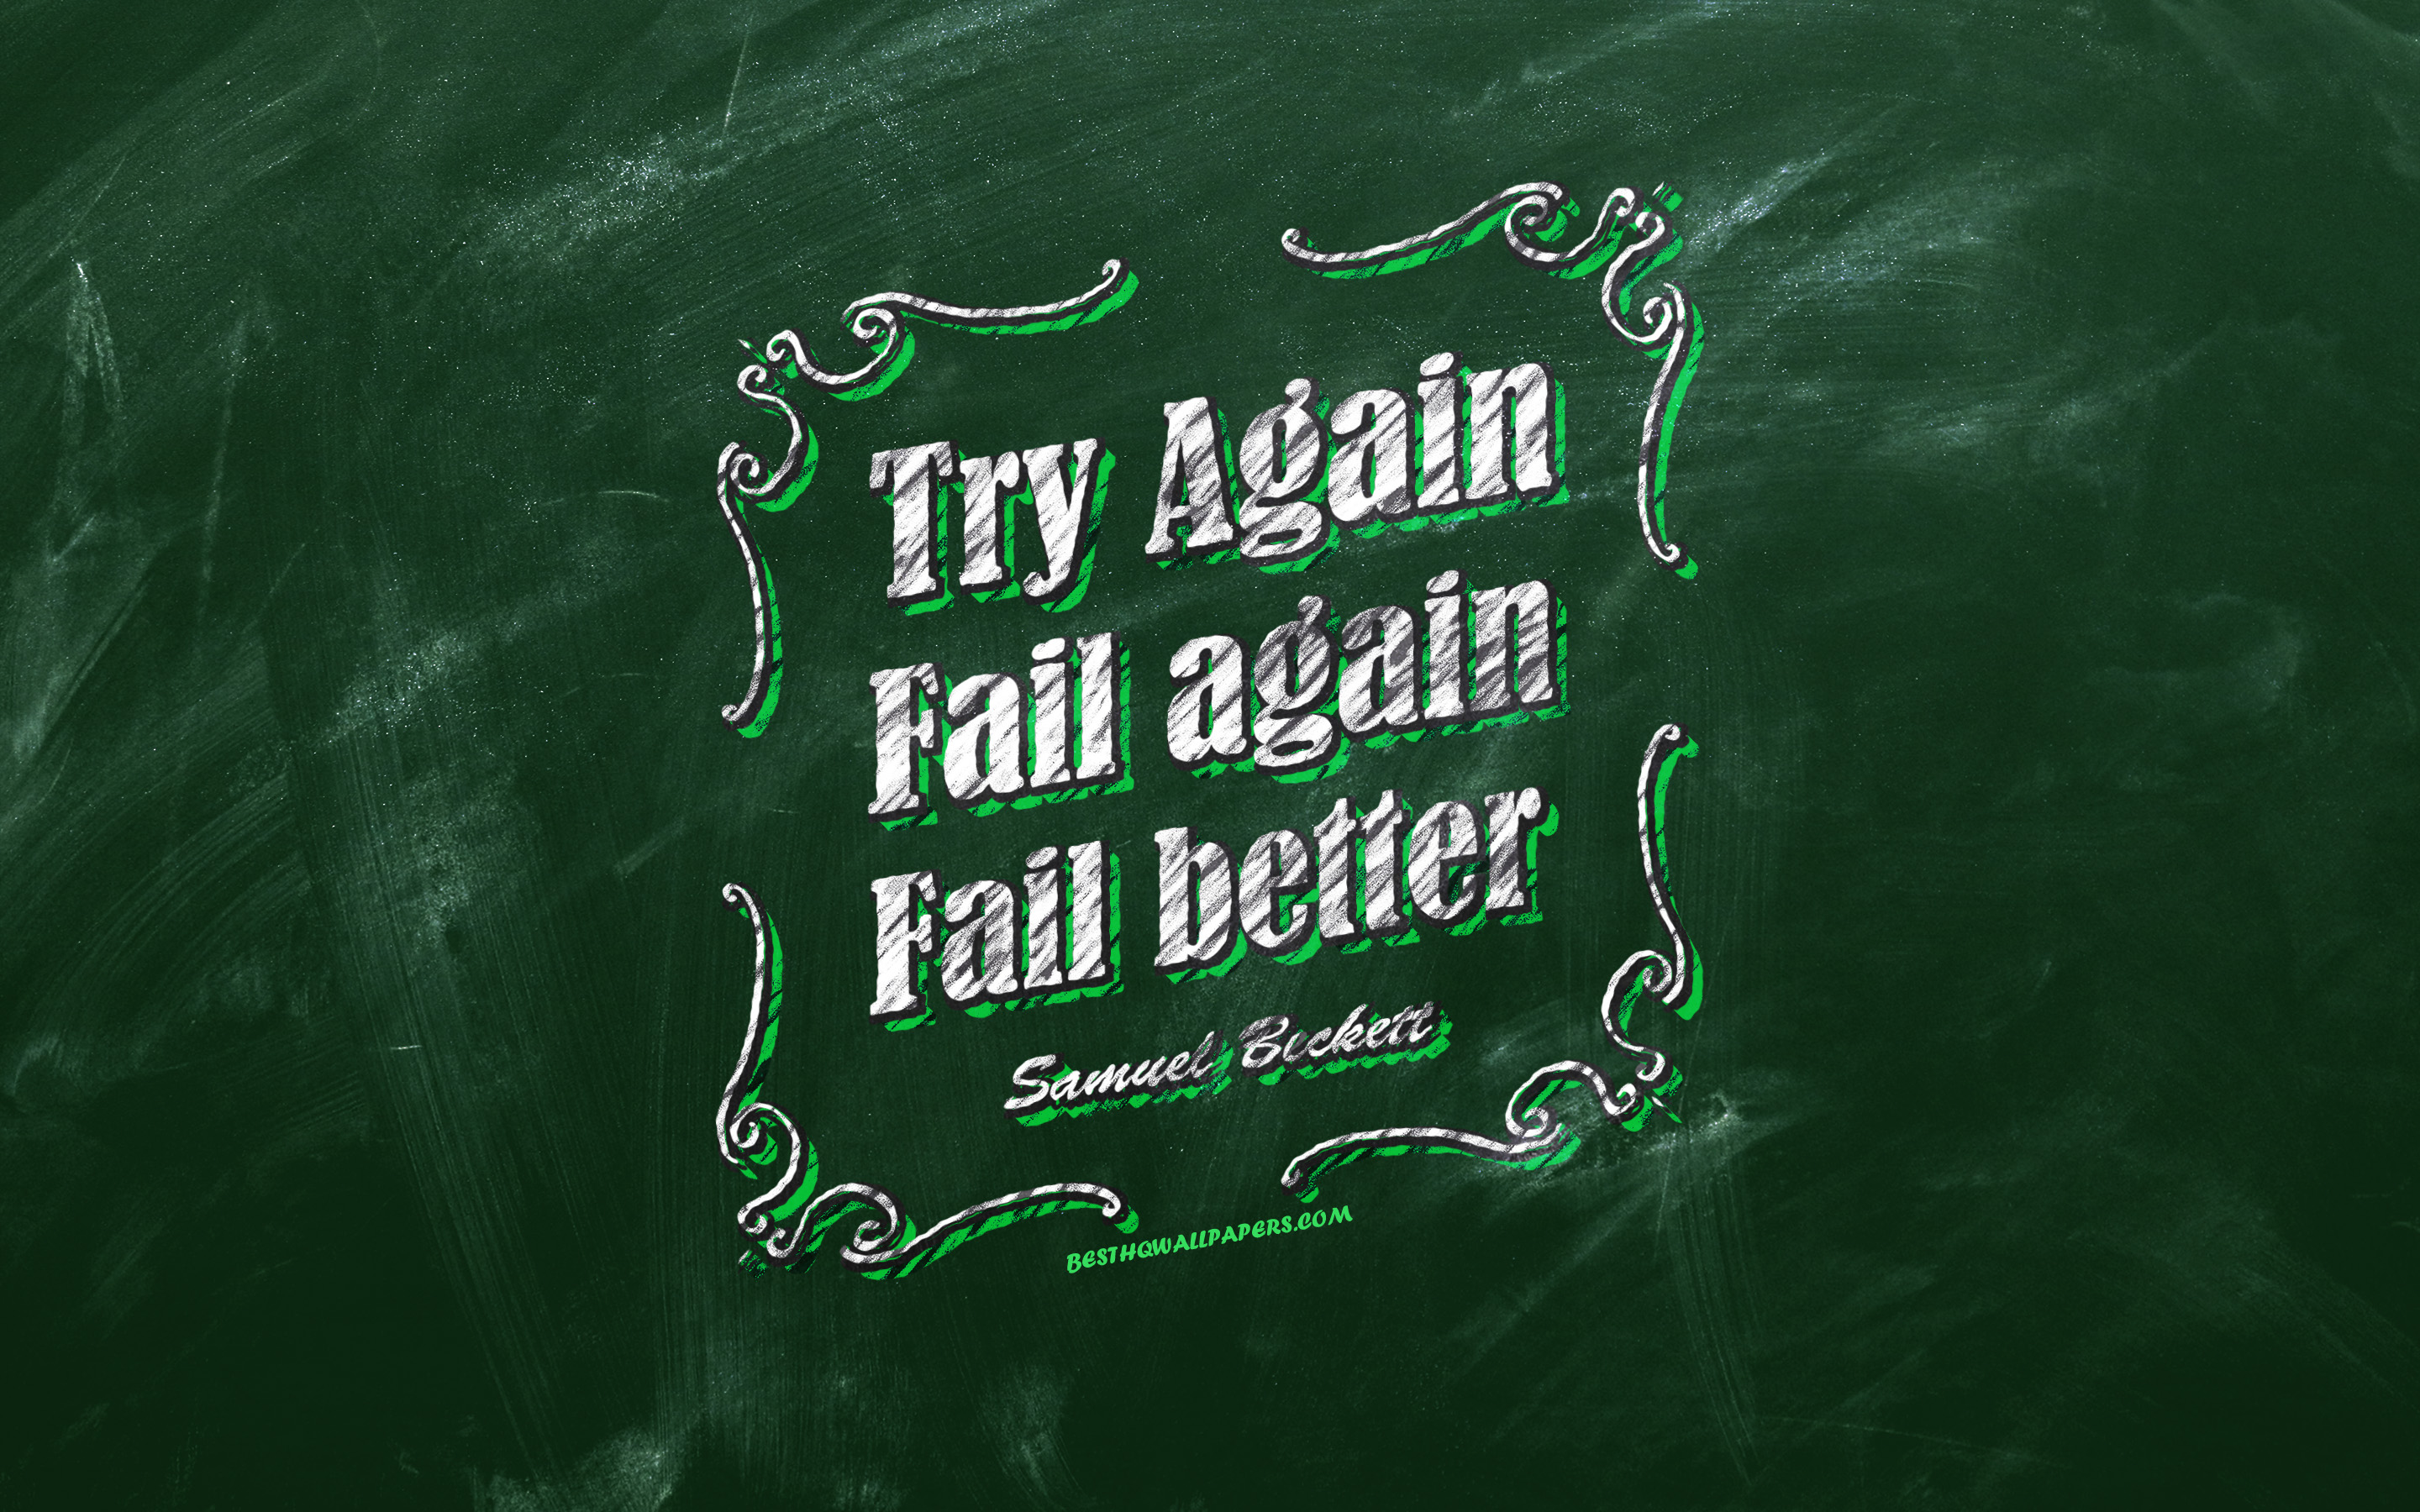 Download wallpaper Try Again Fail again Fail better, chalkboard, Samuel Beckett Quotes, green background, quotes about life, inspiration, Samuel Beckett, motivation for desktop with resolution 2880x1800. High Quality HD picture wallpaper